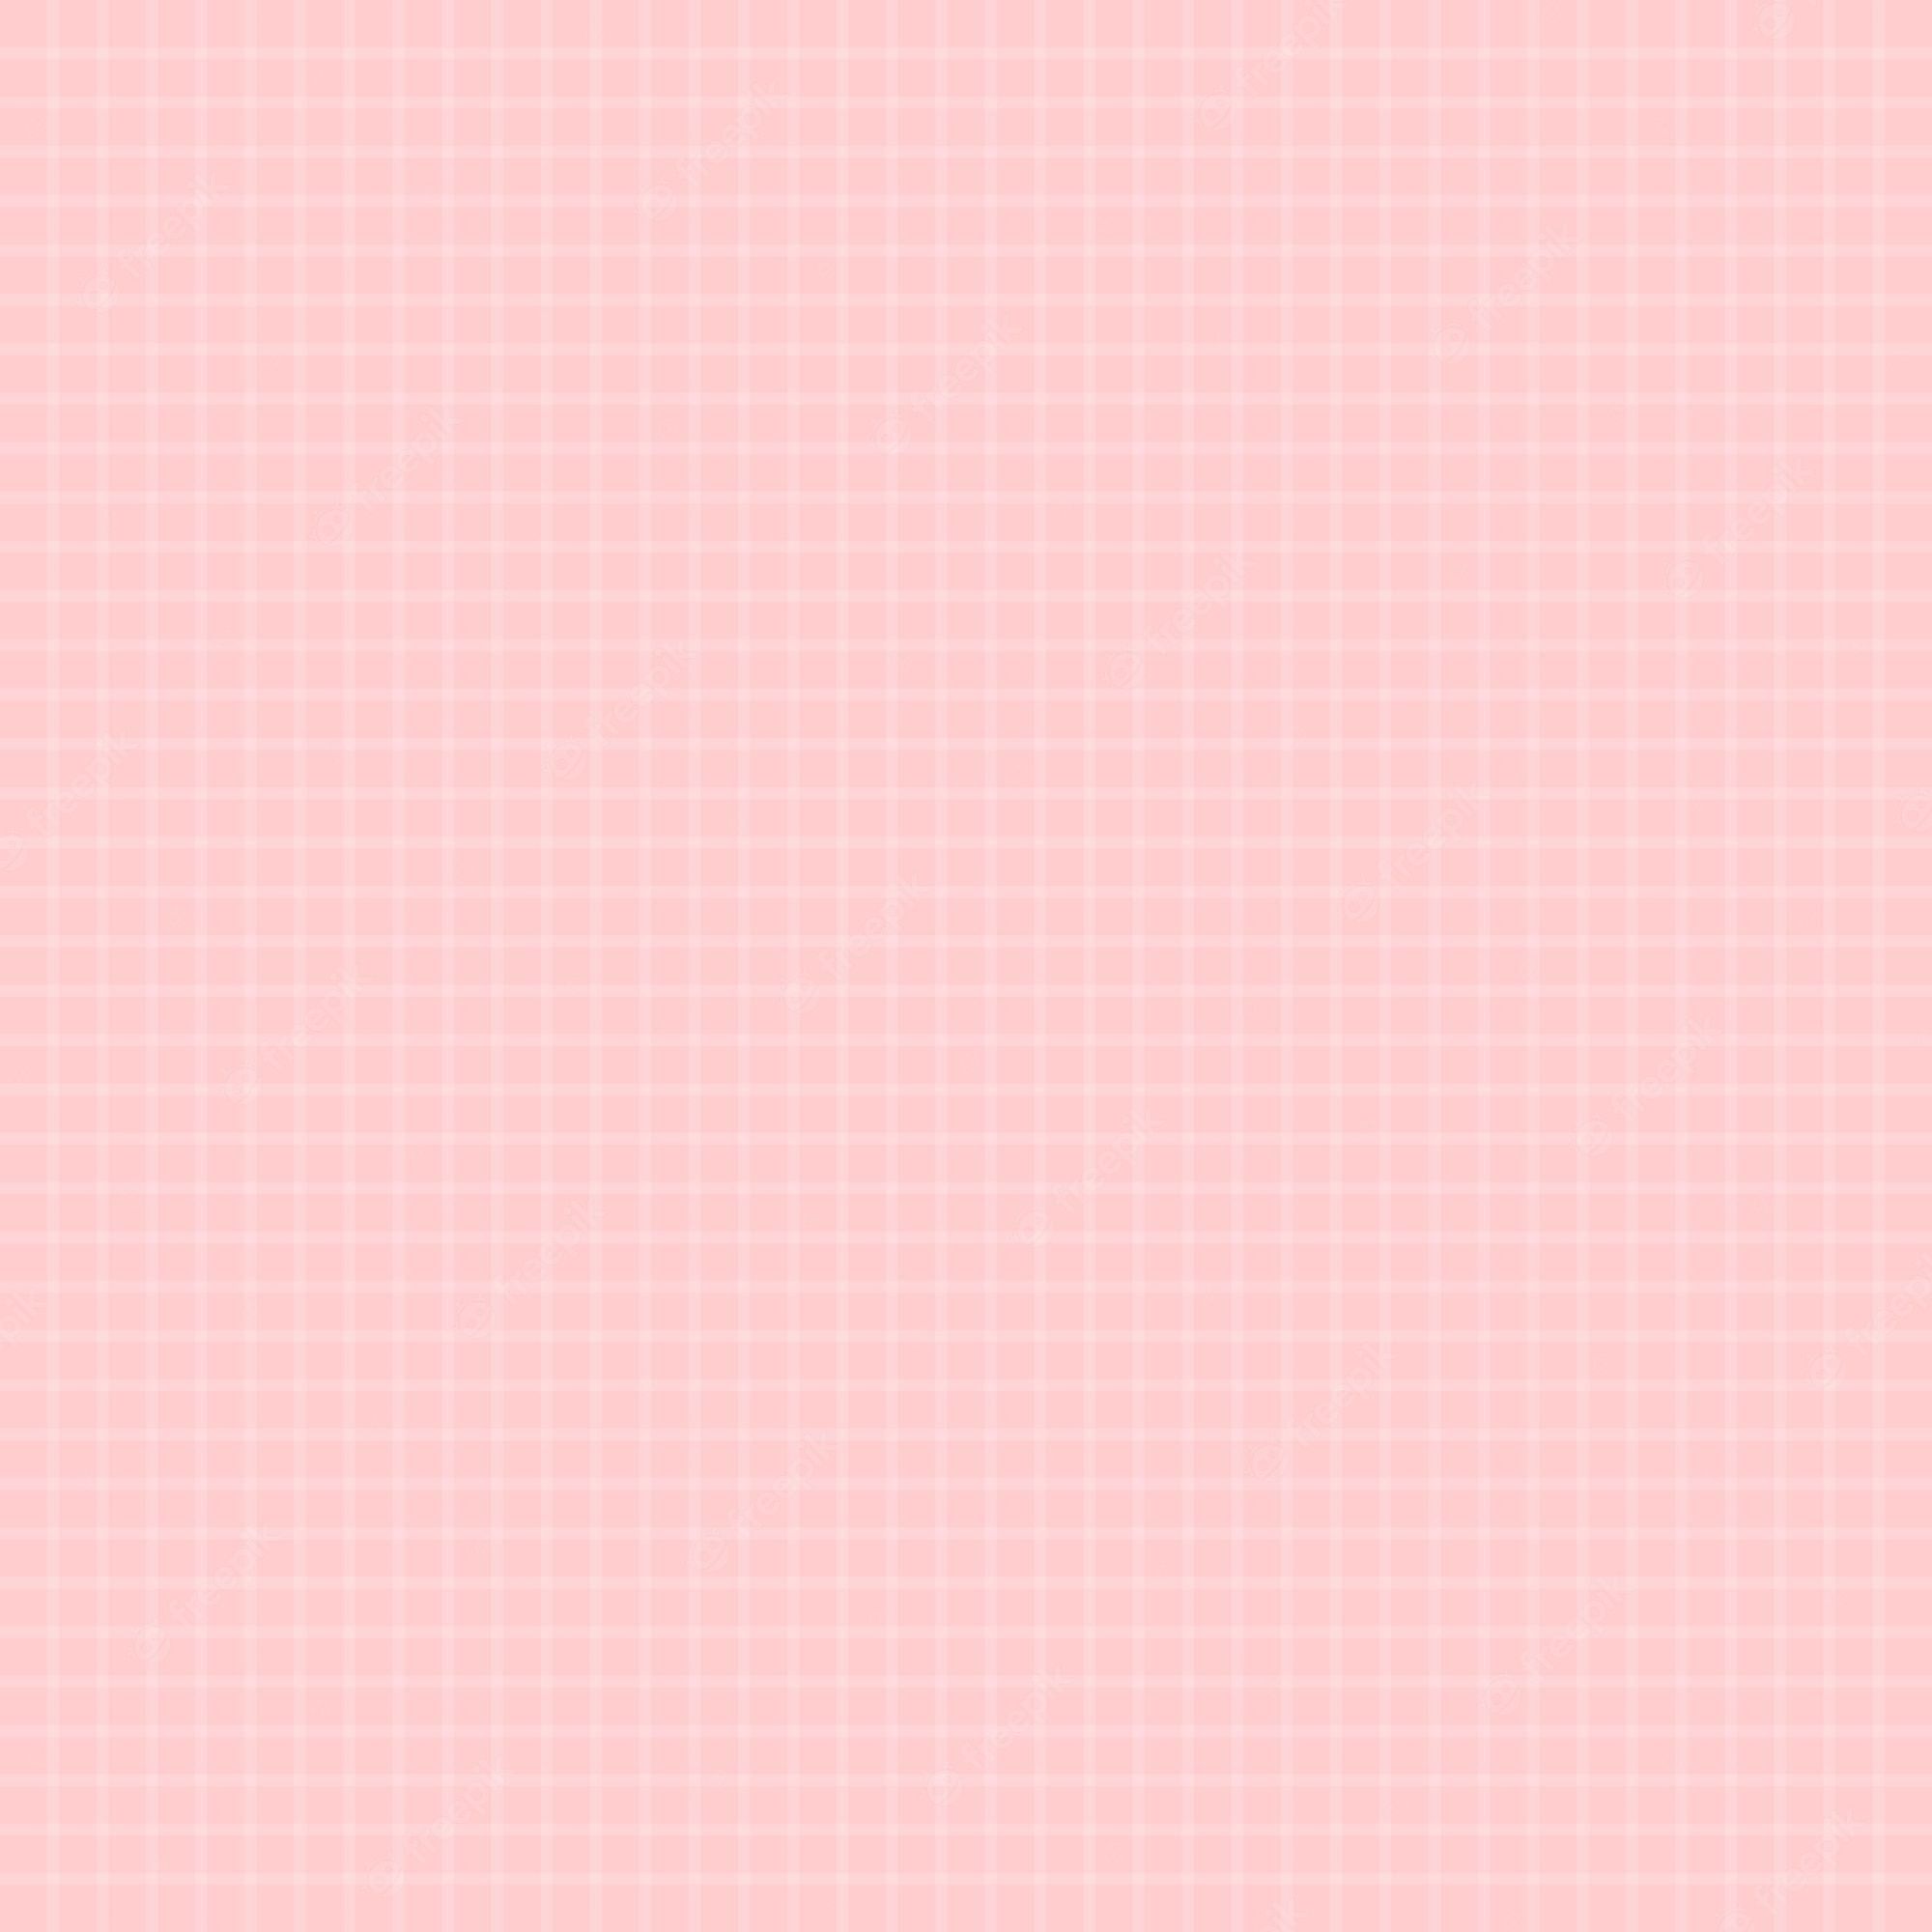 A pink and white grid background - Hot pink